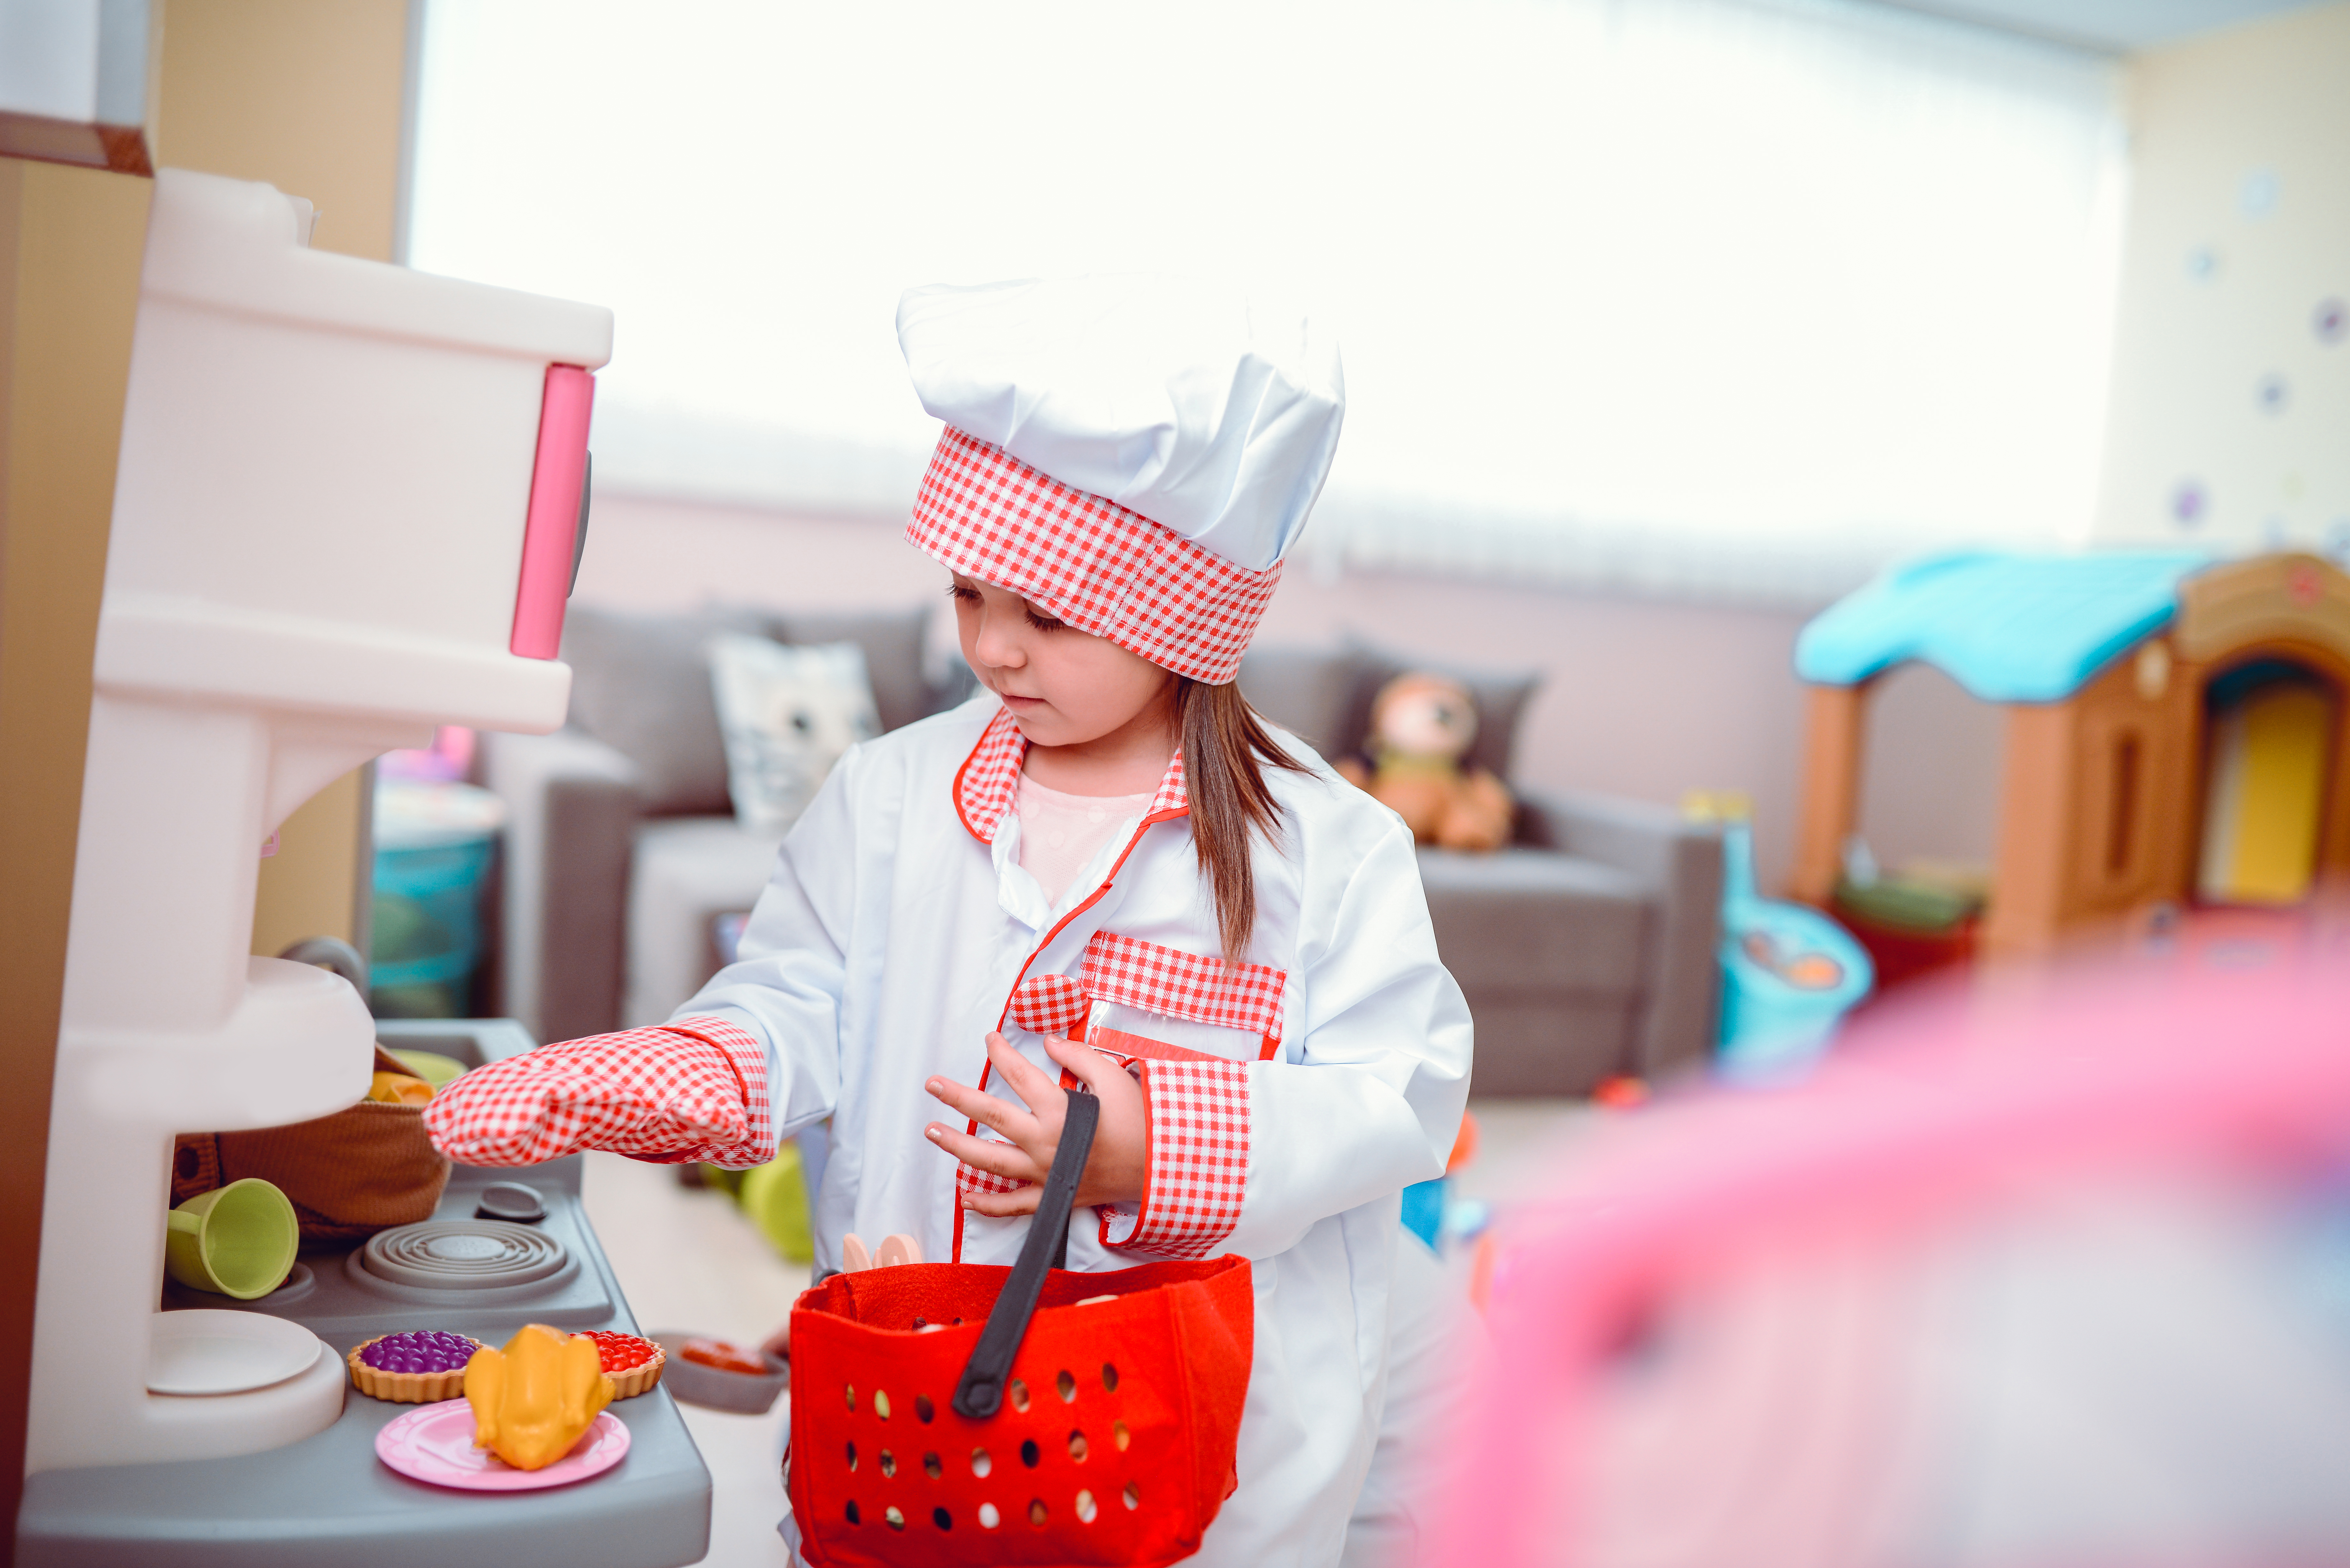 Toddler Girl Playing Cooking Chef in a Preschool Classroom | Source: Getty Images